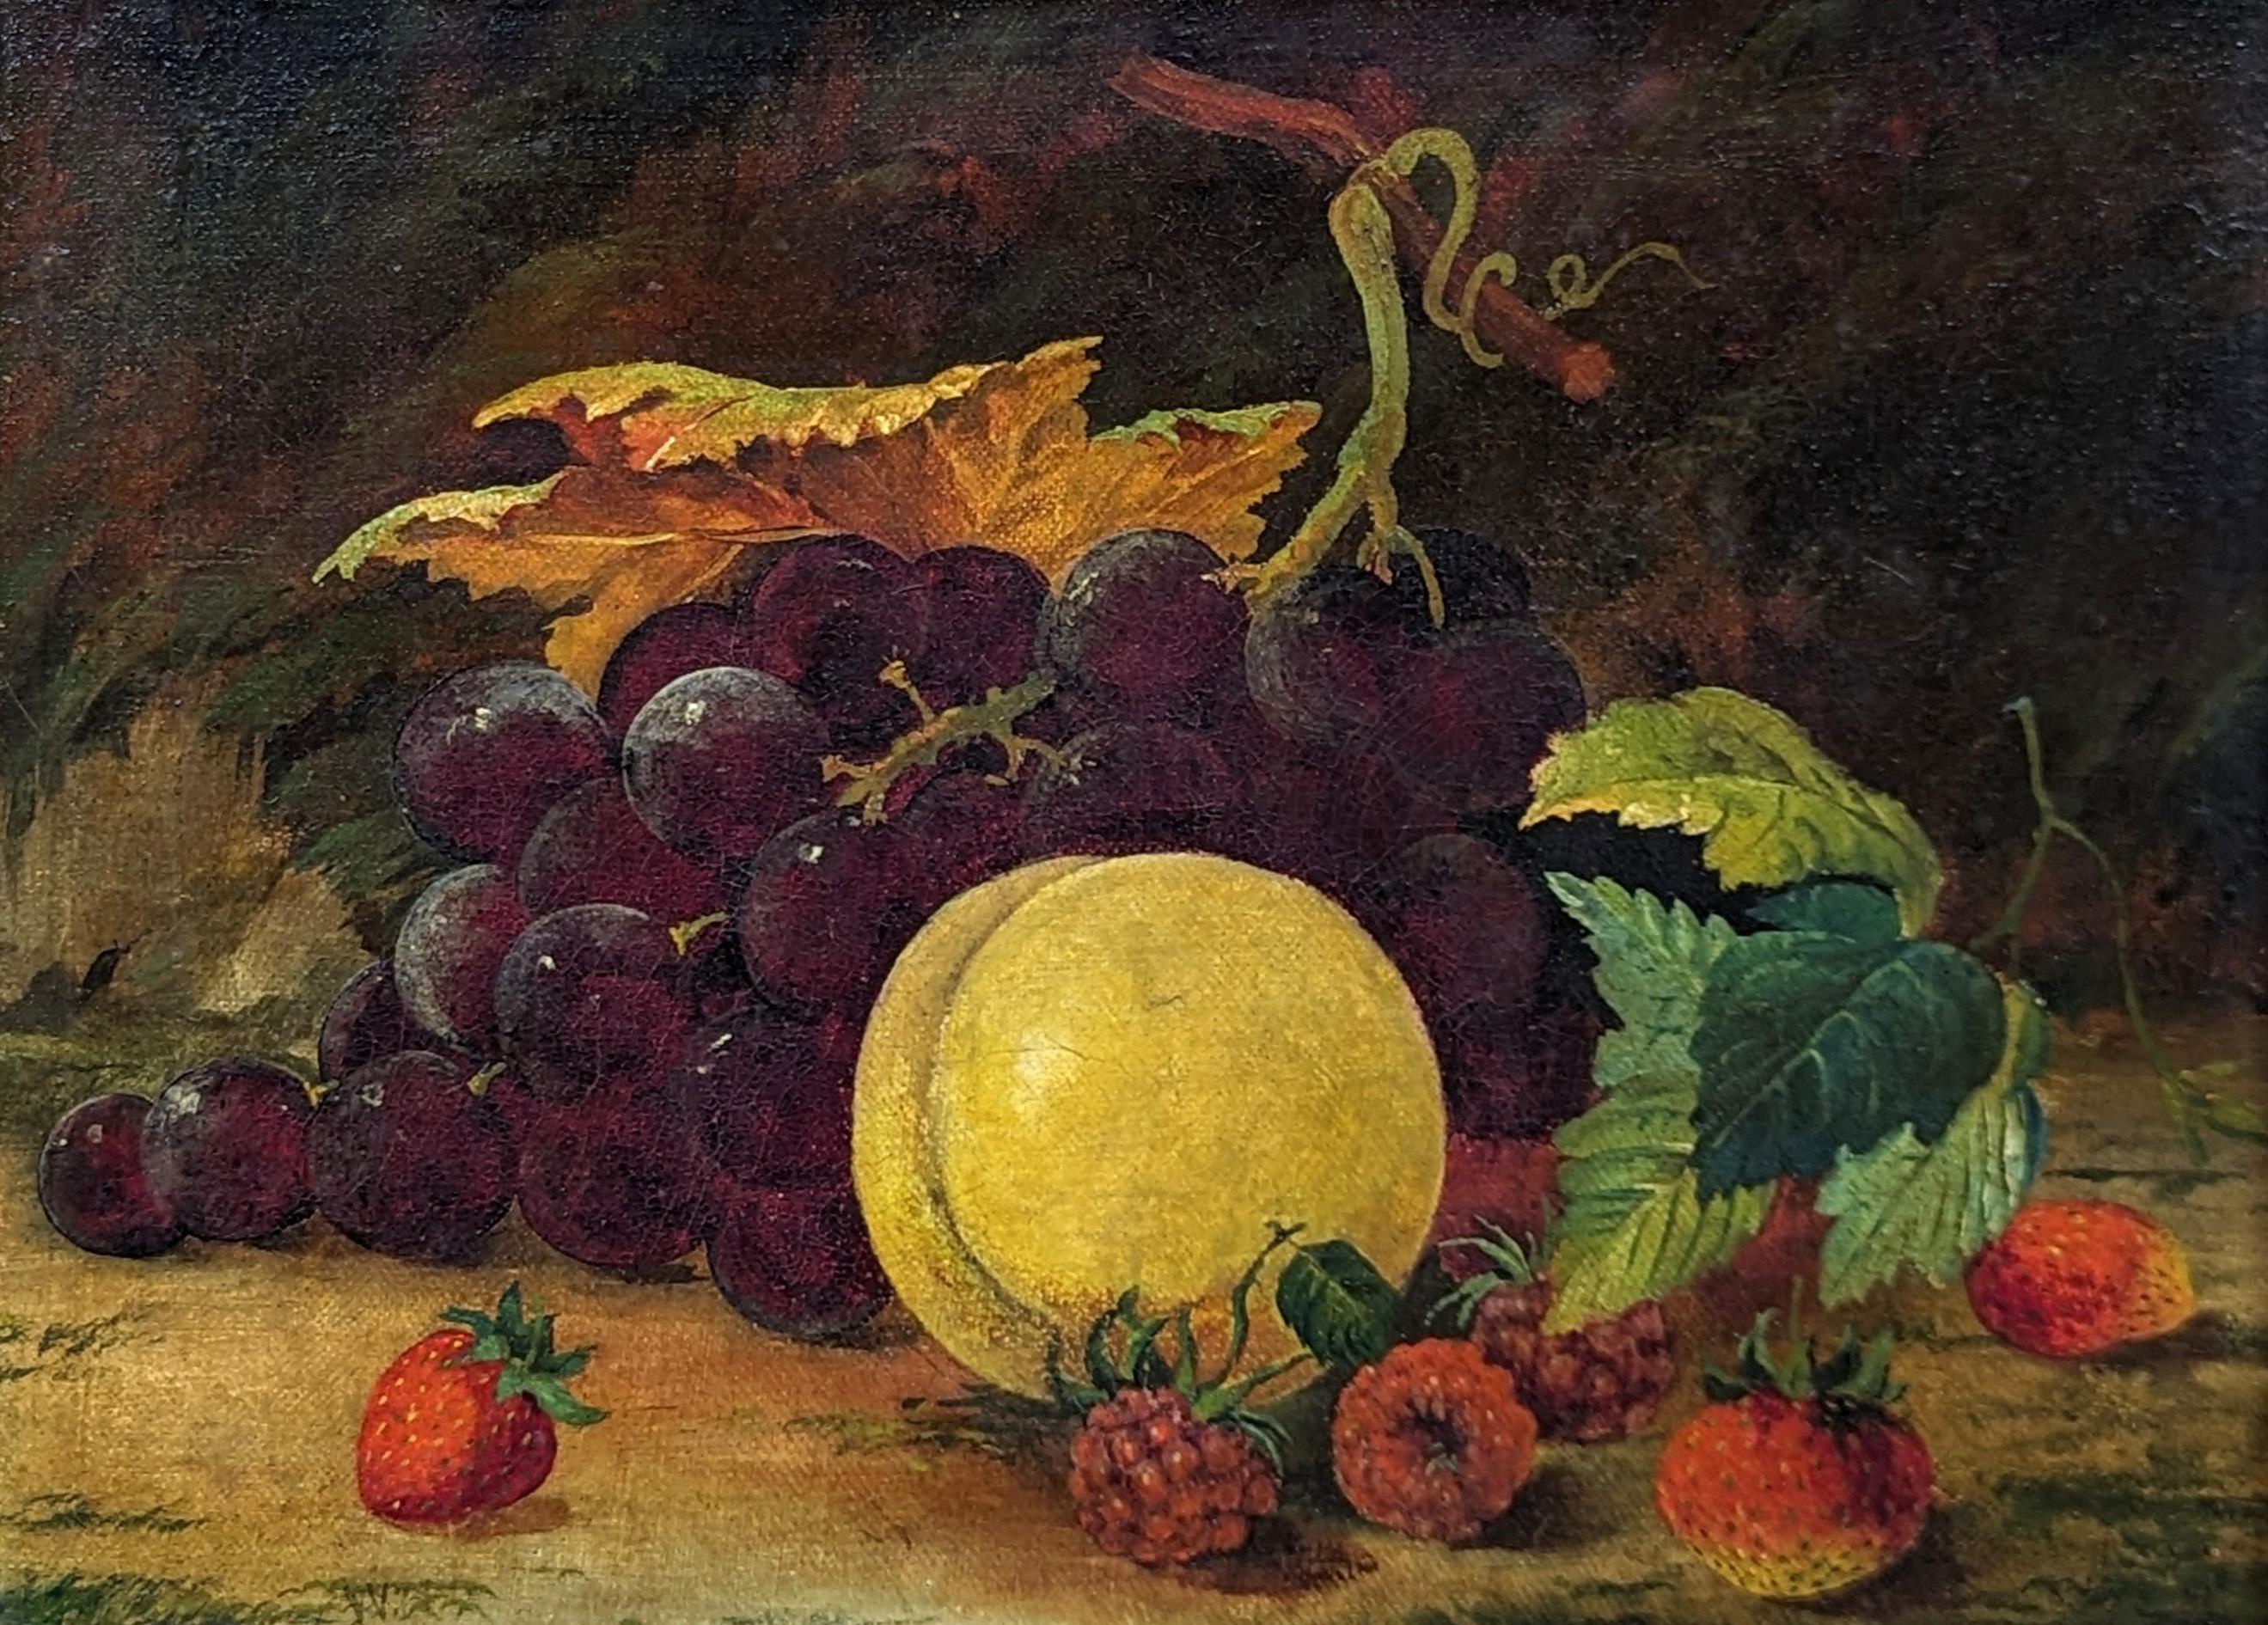 The work features a beautifully rendered still life of a group of strawberries arranged next to a bunch of grapes in the style of William Henry Hunt. Currently hung in a carved, gold leaf frame with a plaque that reads 